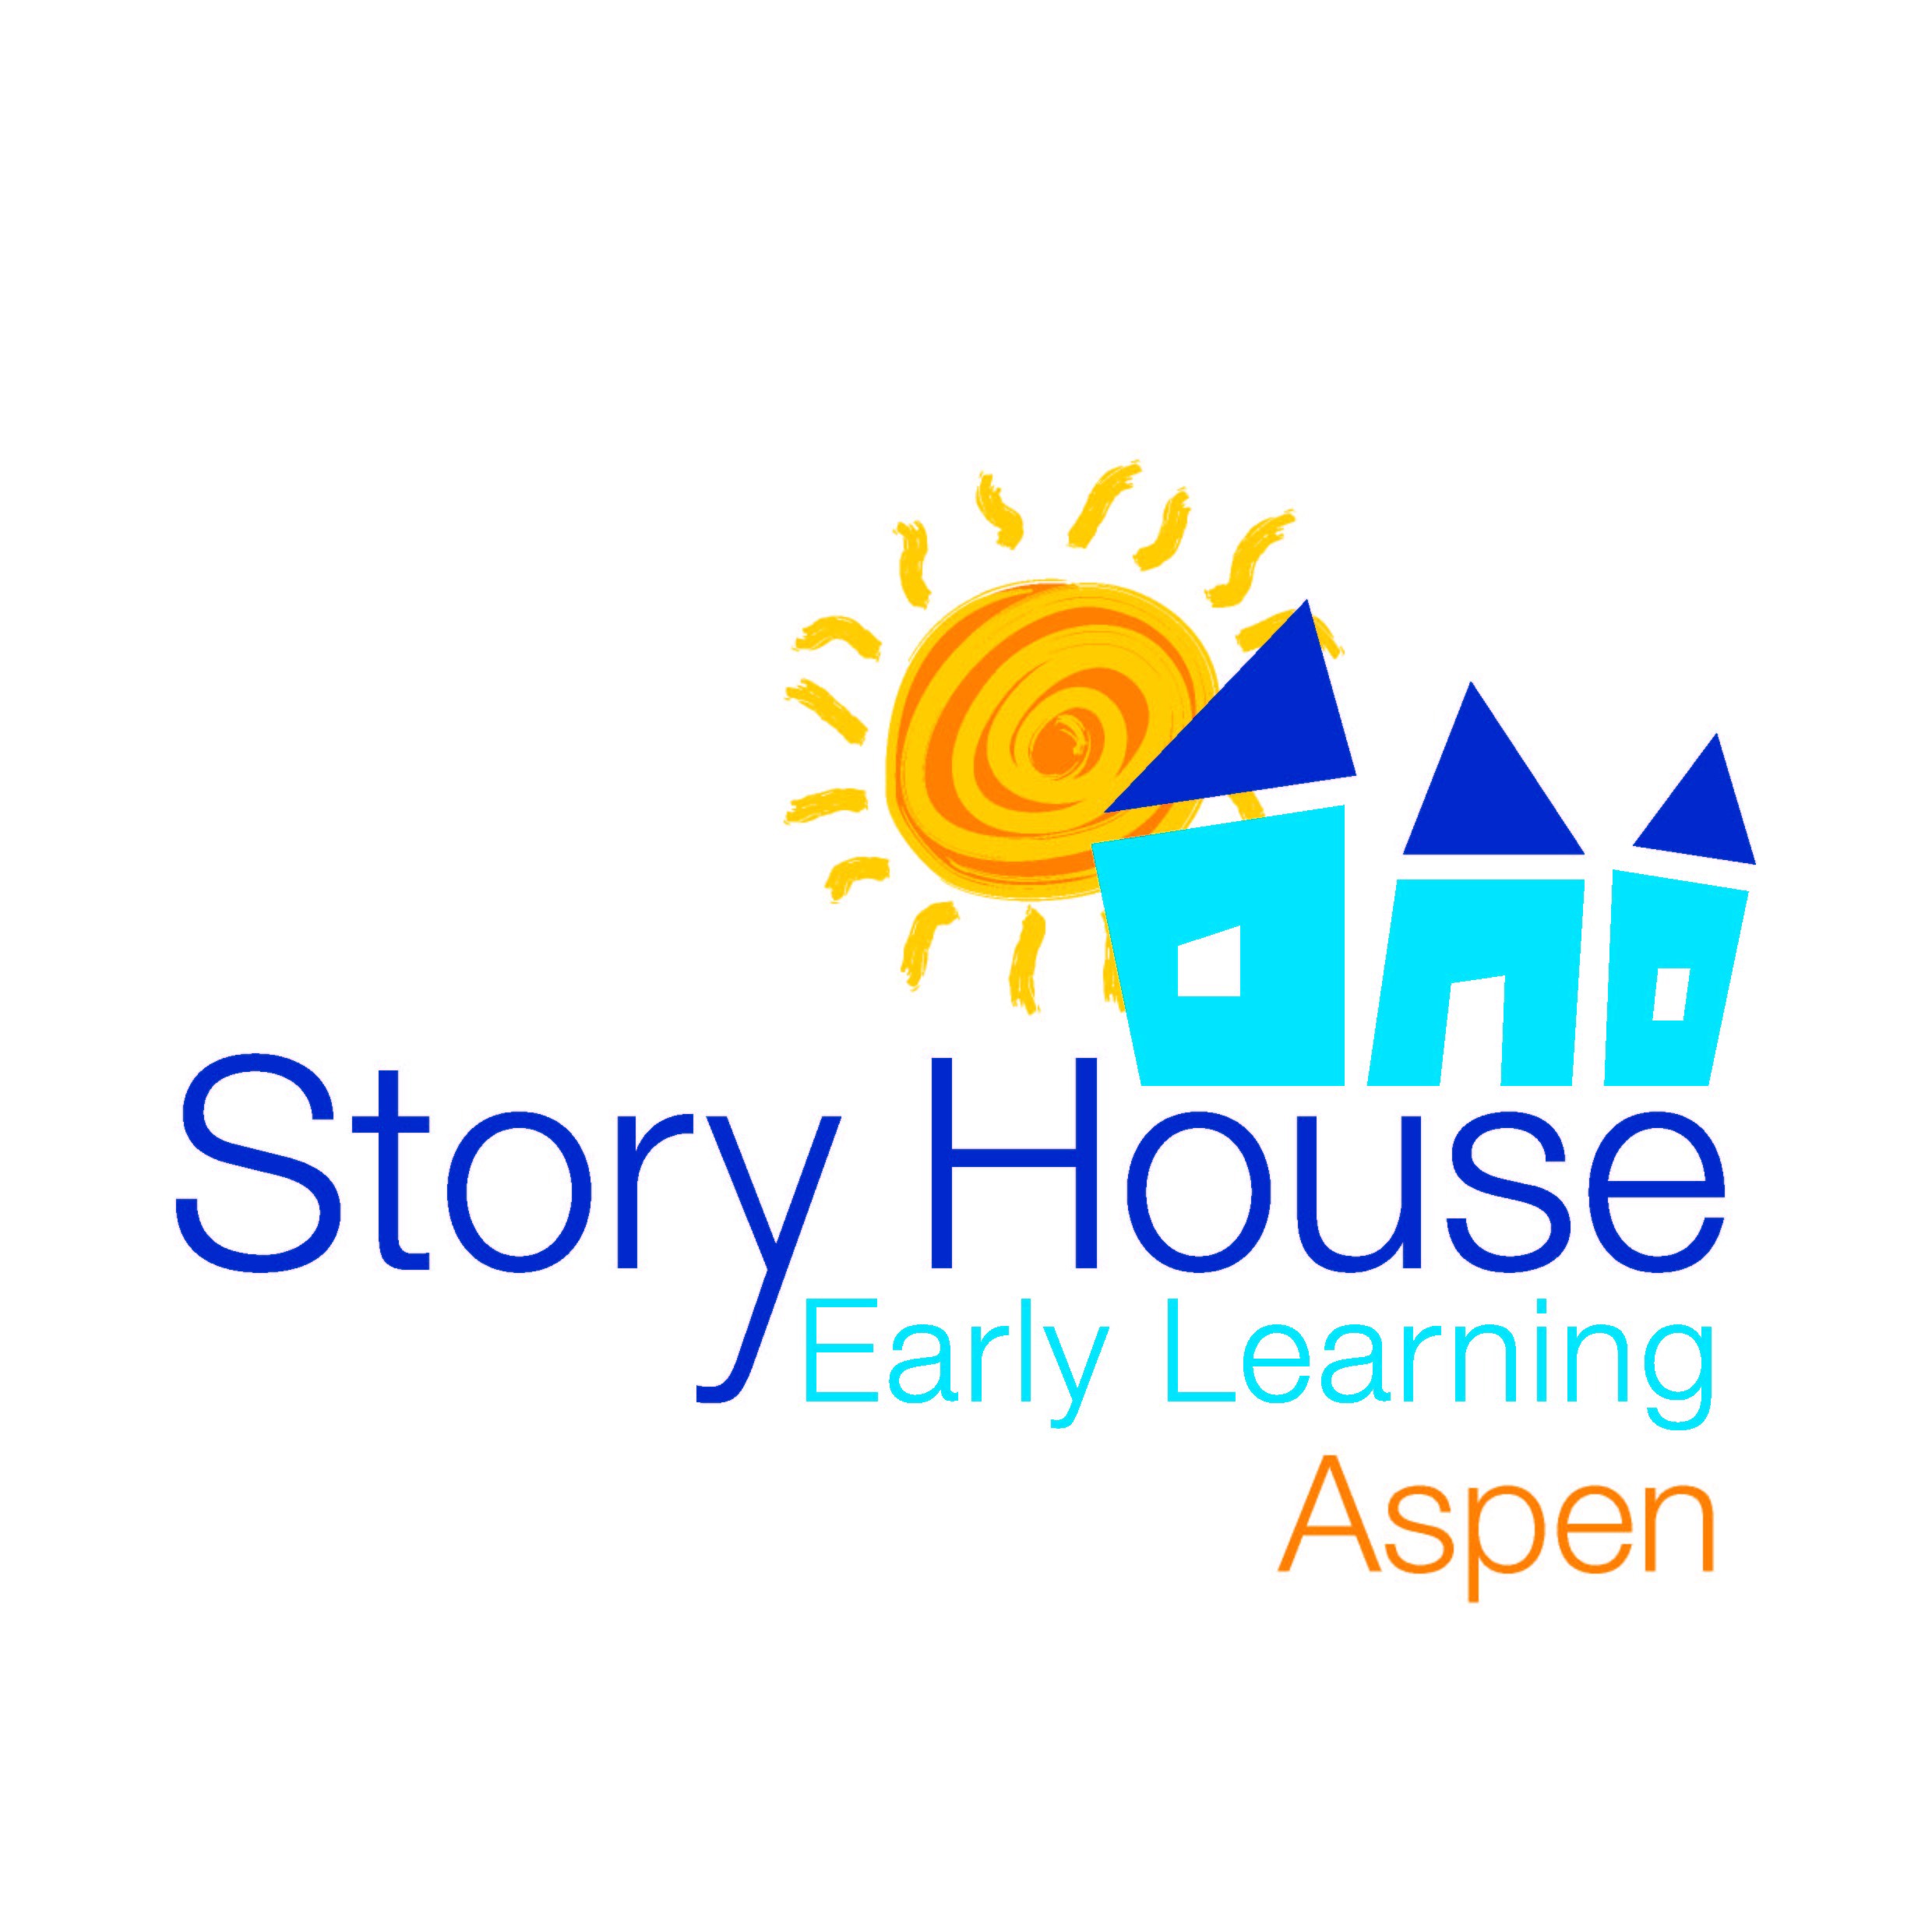 Story House Early Learning Aspen